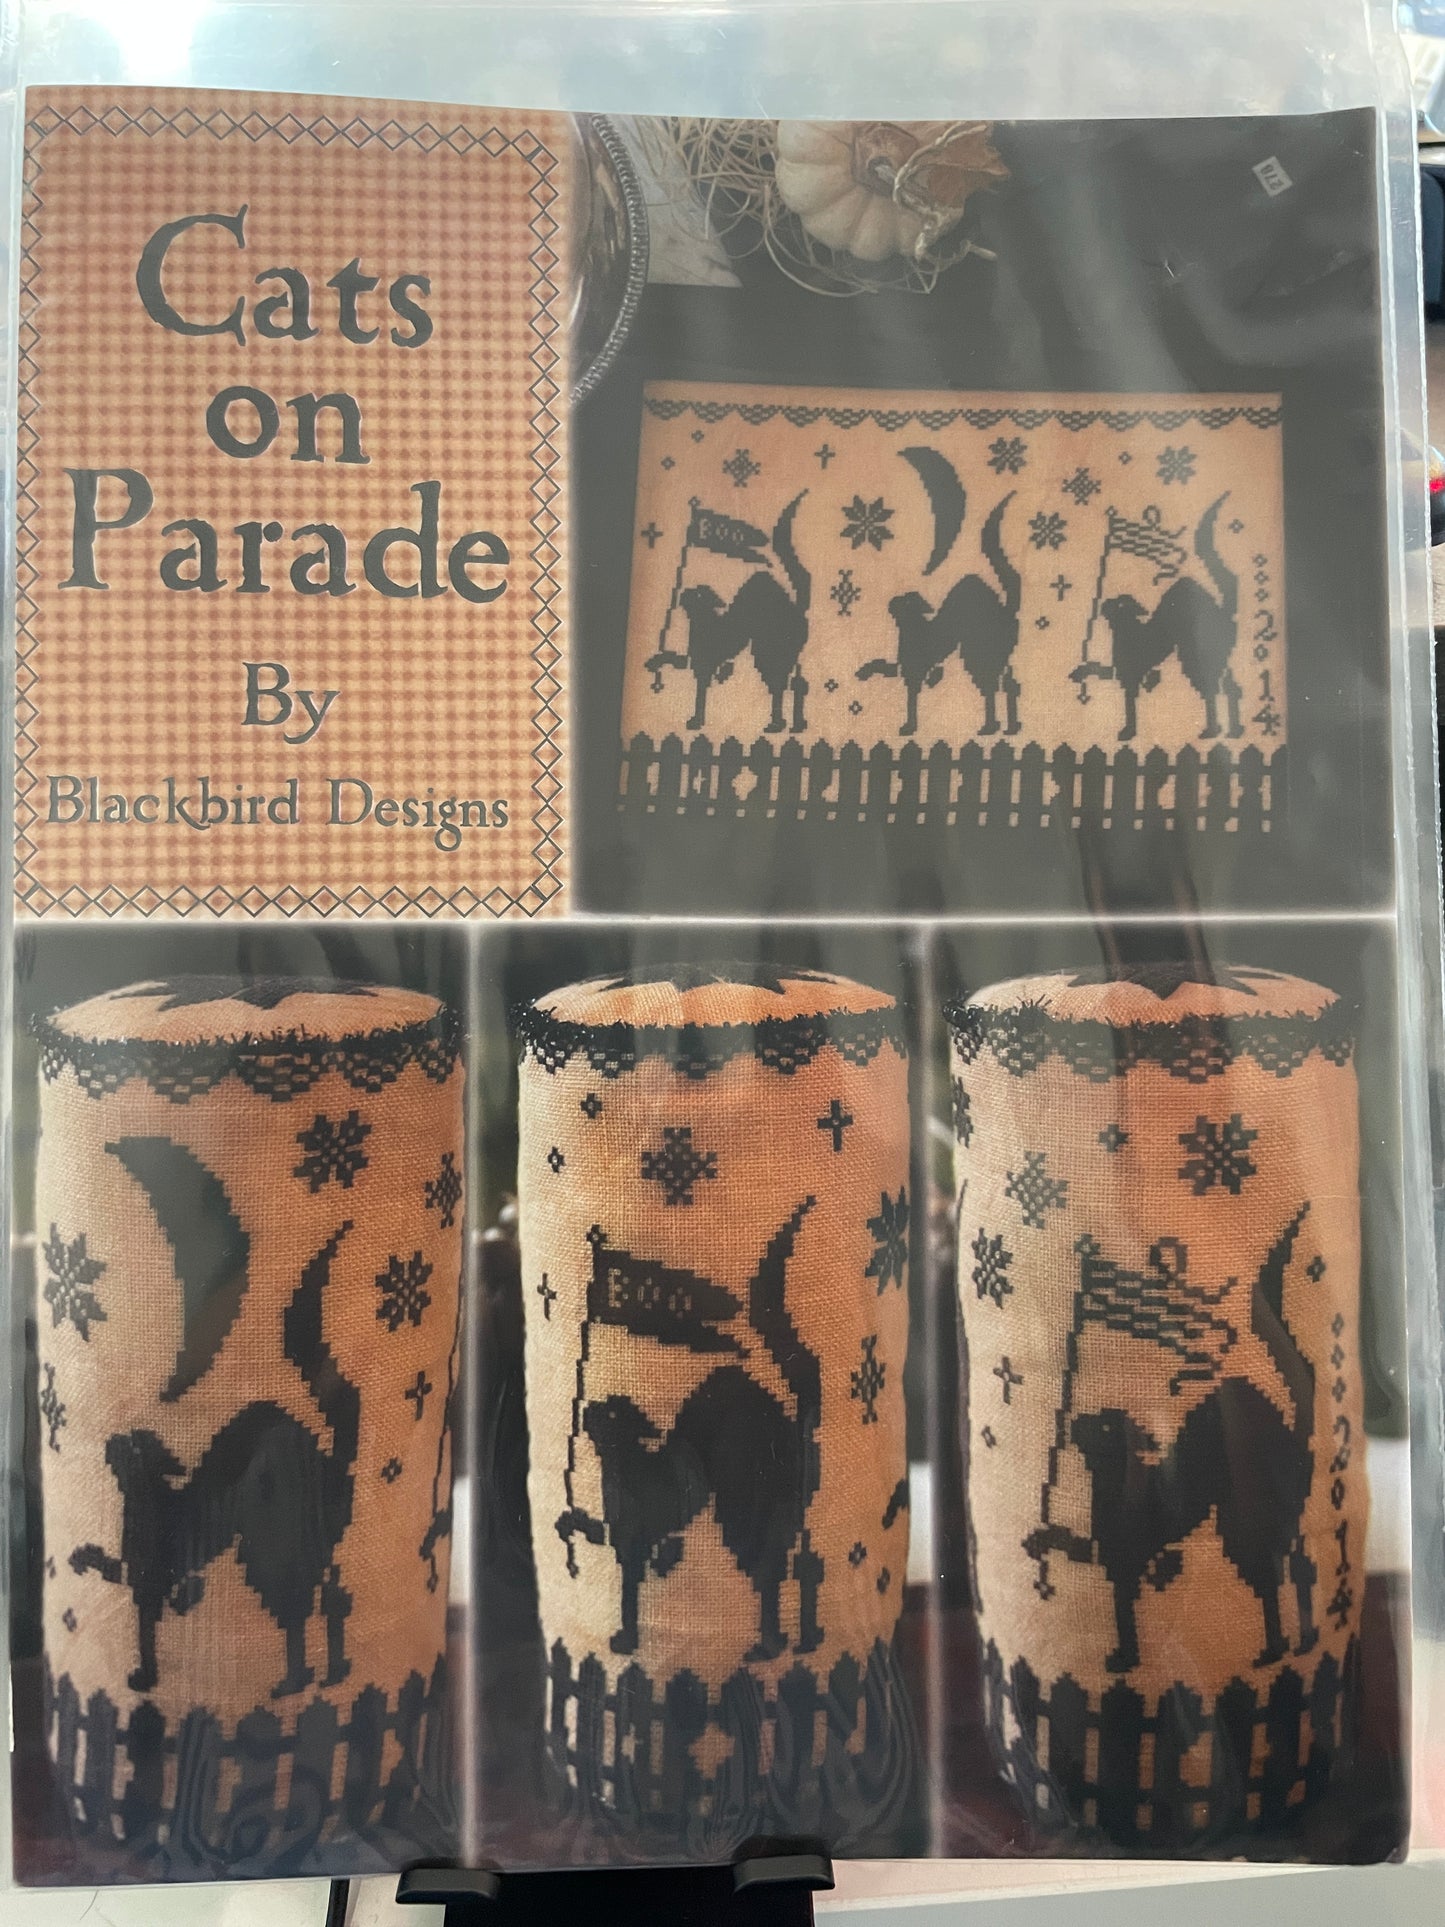 Cat's on Parade